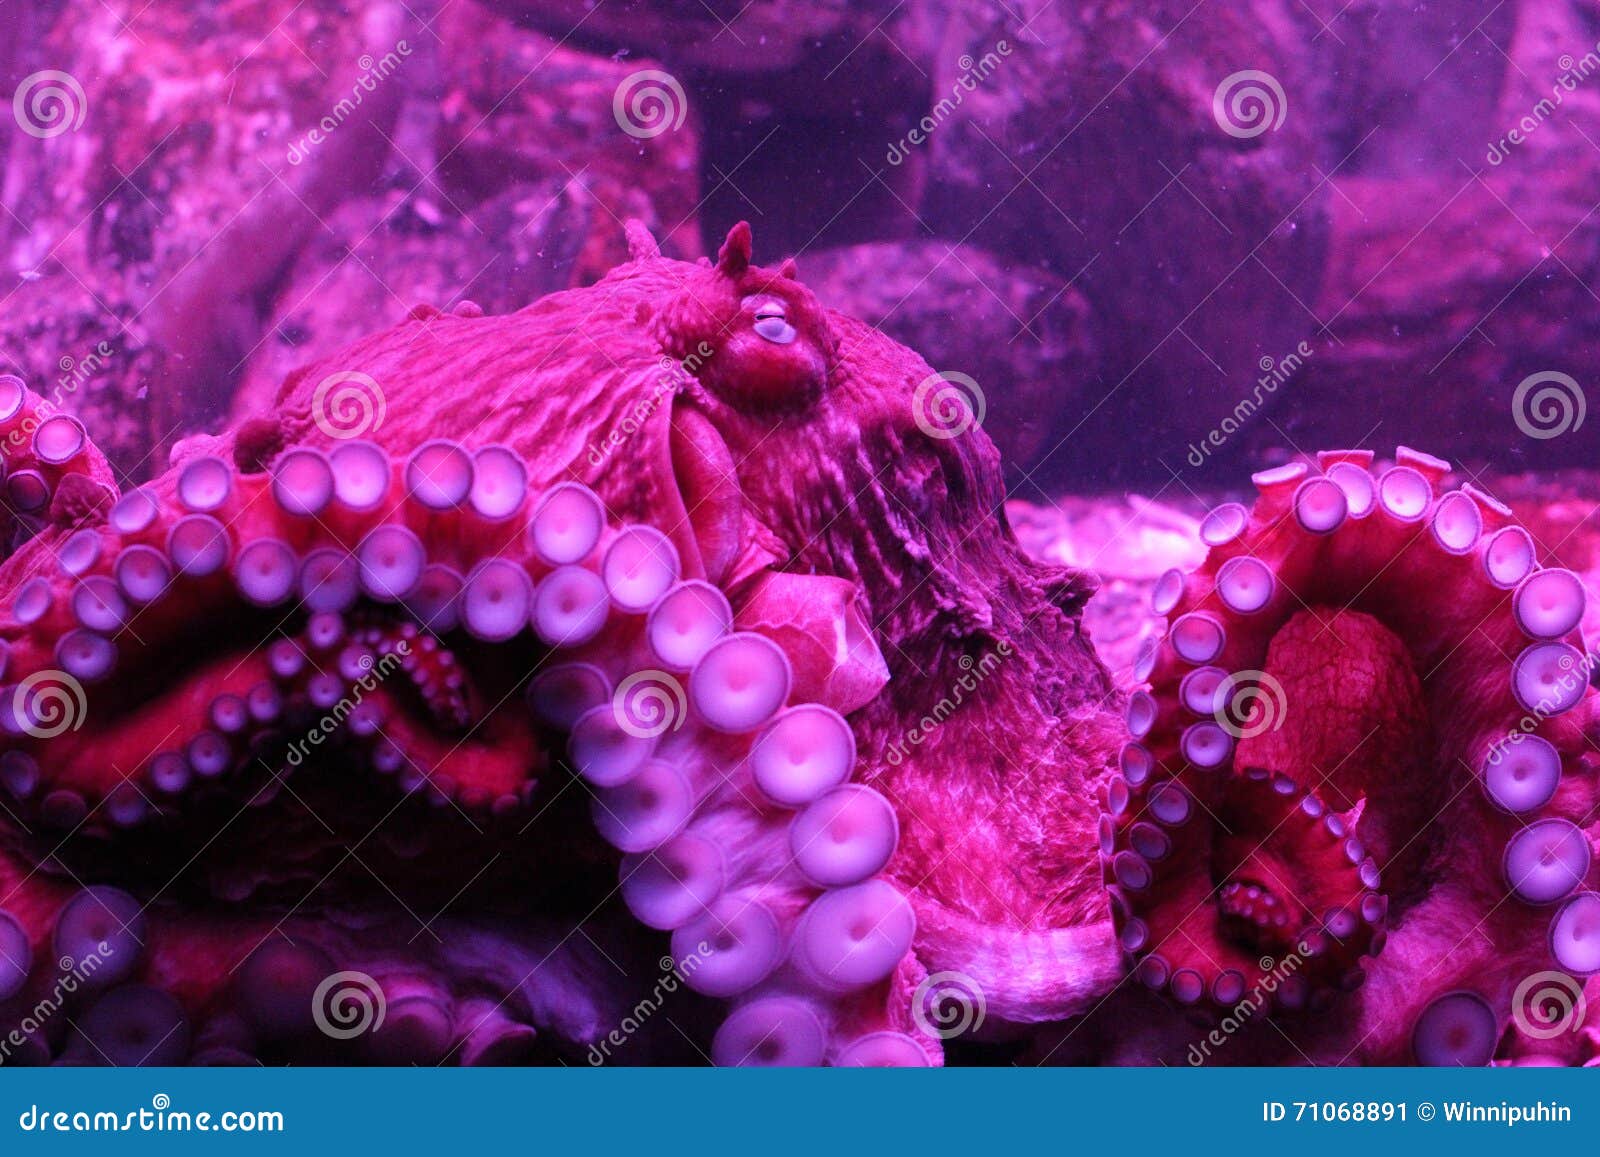 north pacific giant octopus